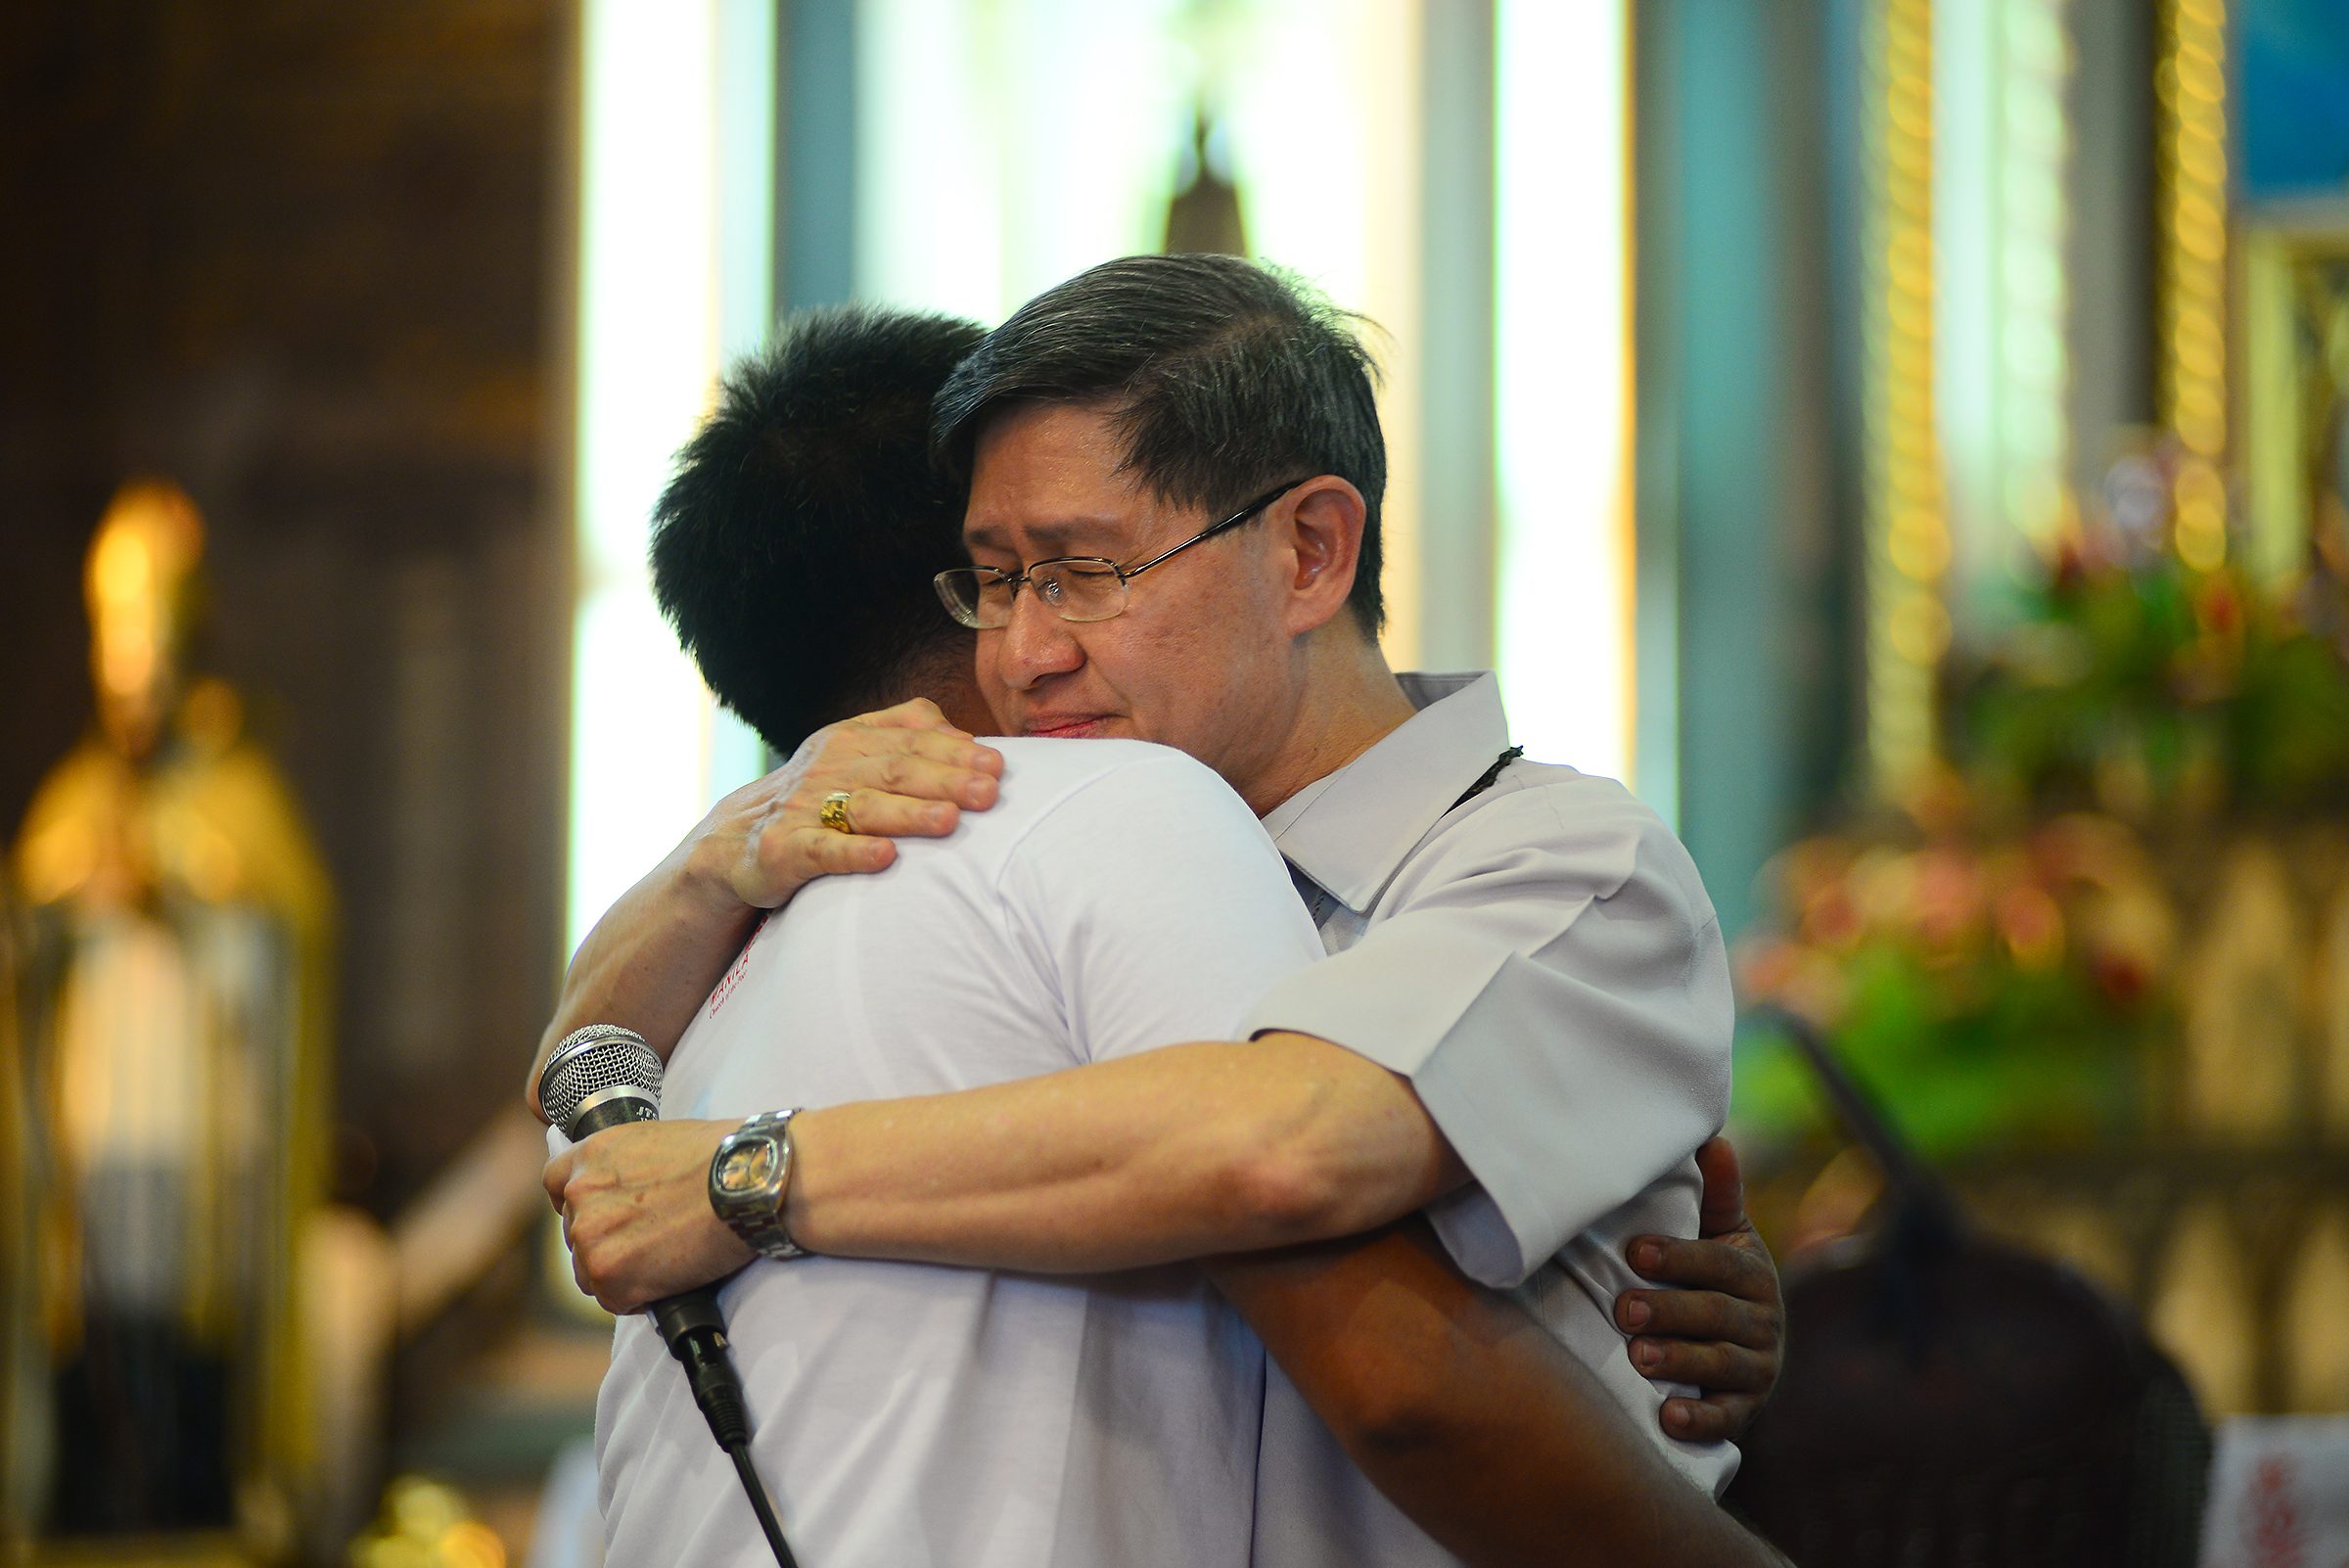 Cardinal Tagle to ex-drug dependents: You’re not a ‘hopeless case’